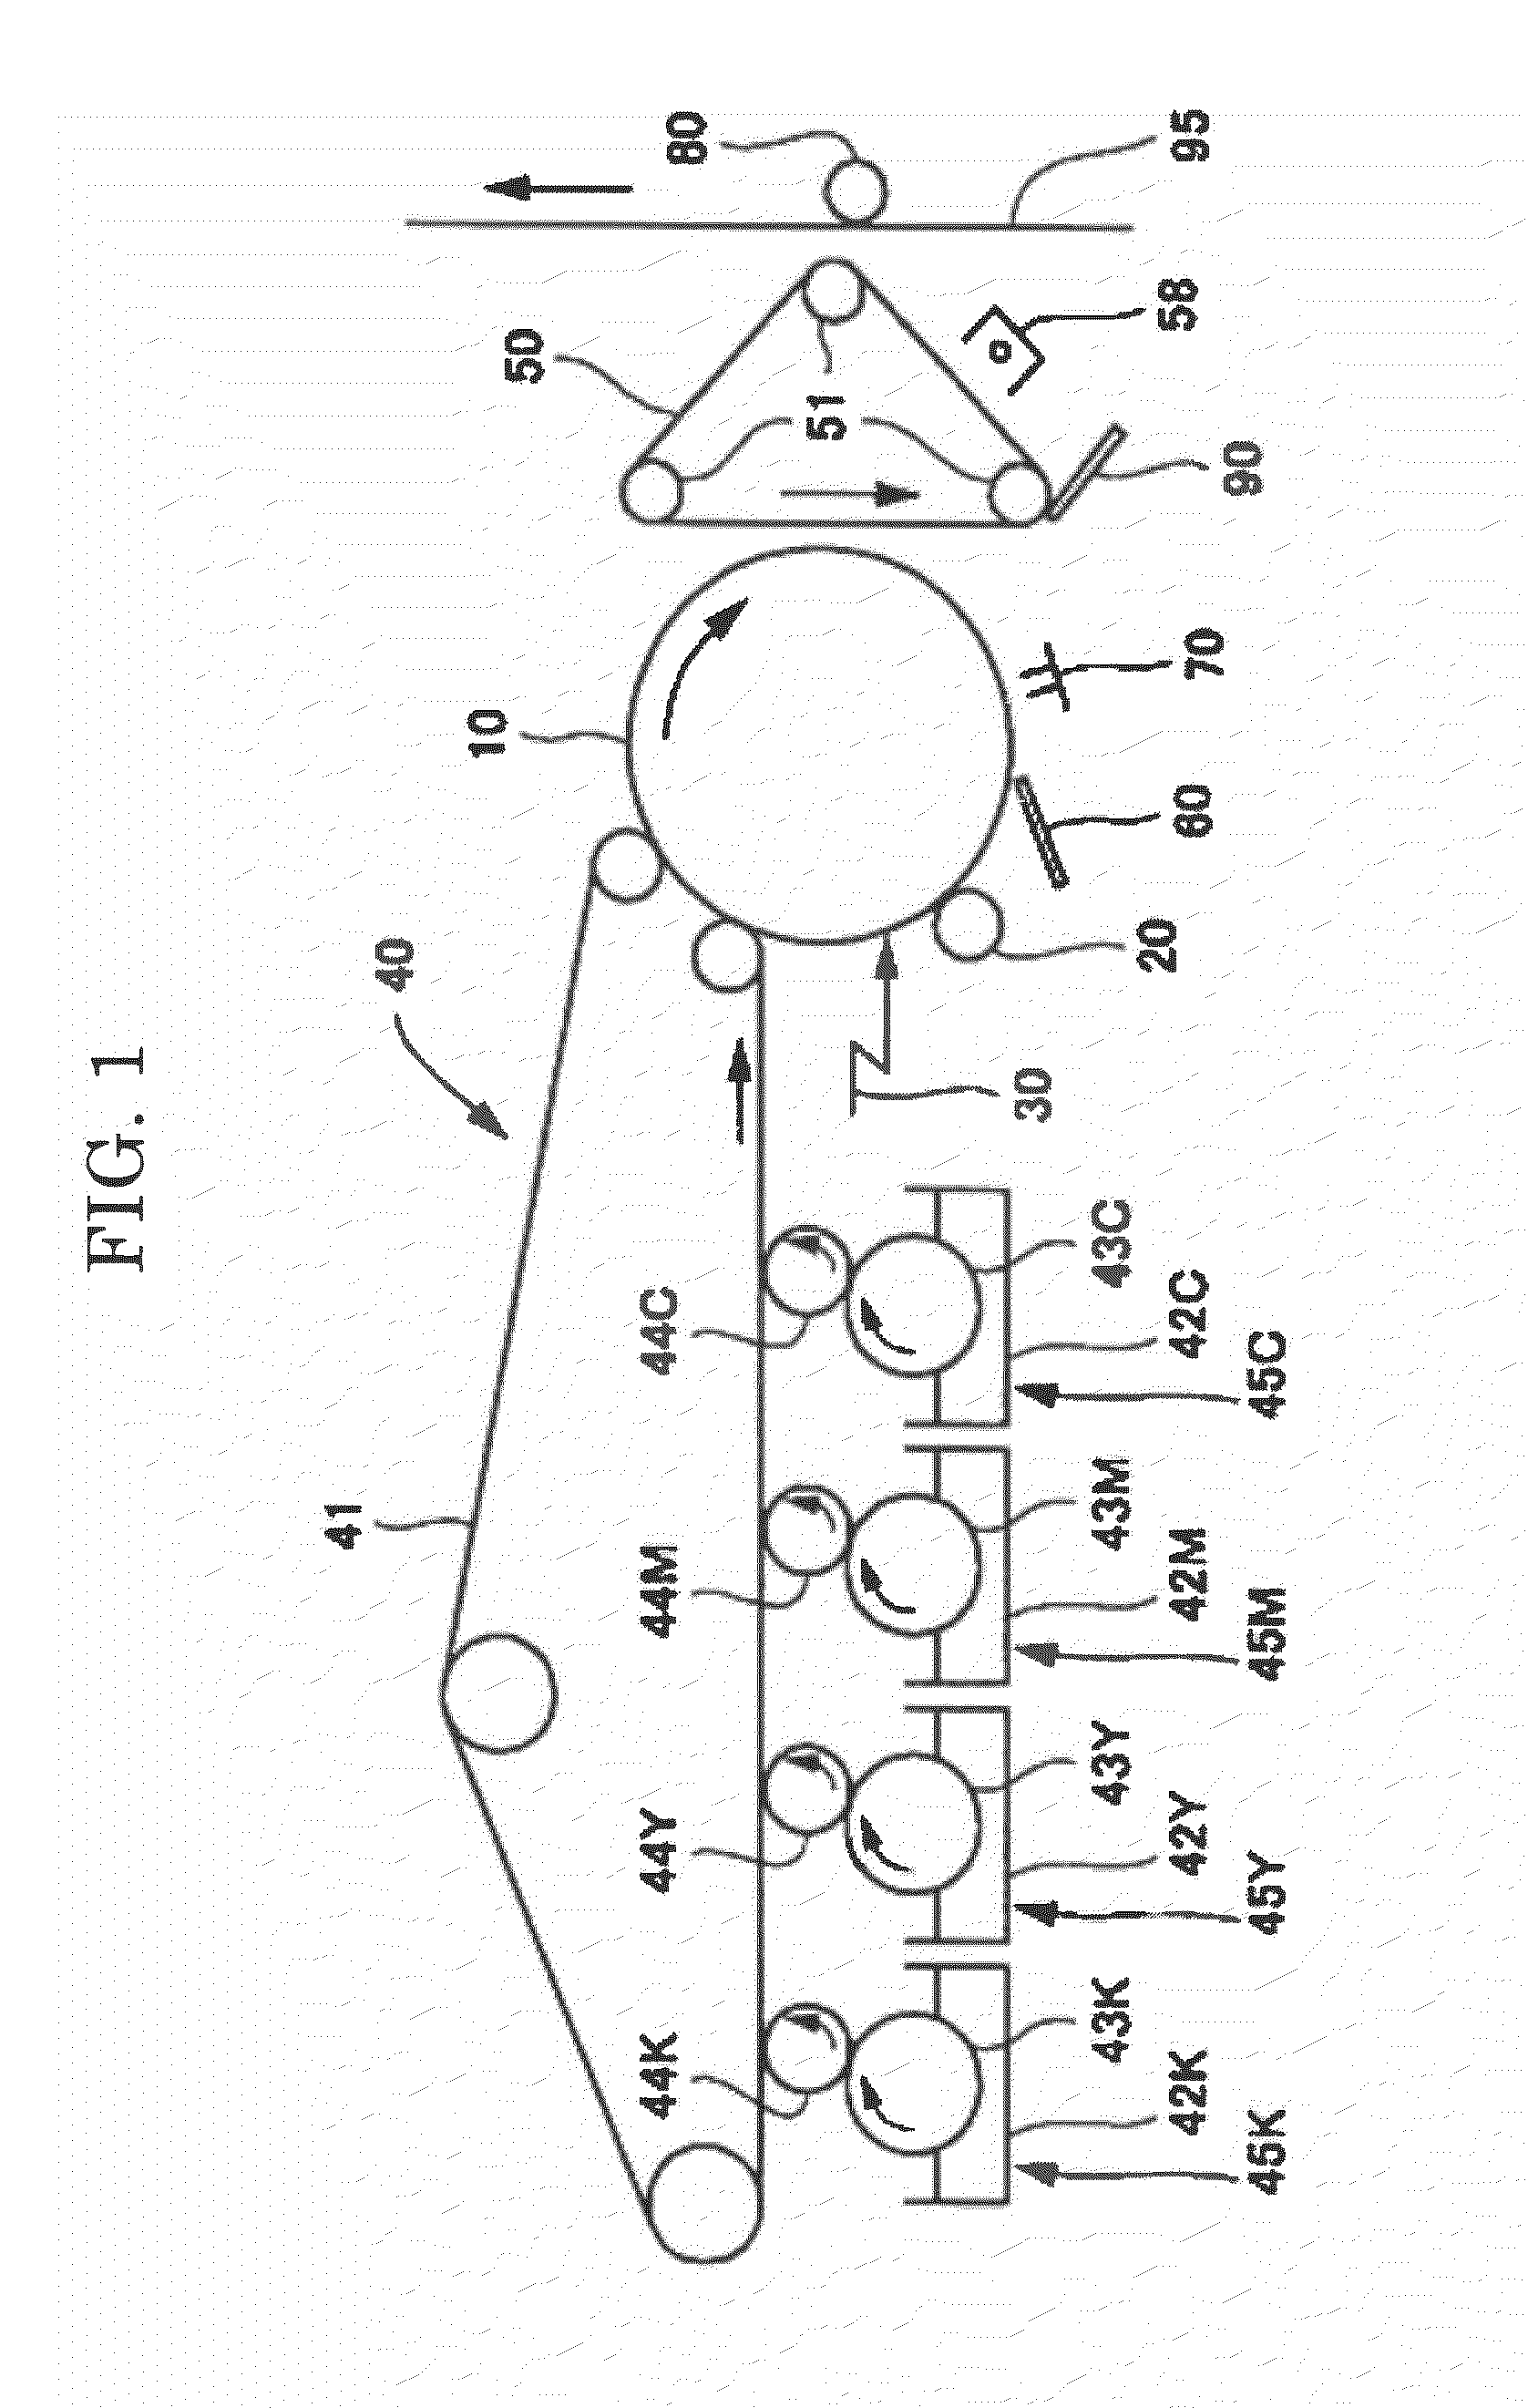 Toner colorant, electrophotographic toner, two-component developer, image forming method, image forming apparatus, and process cartridge